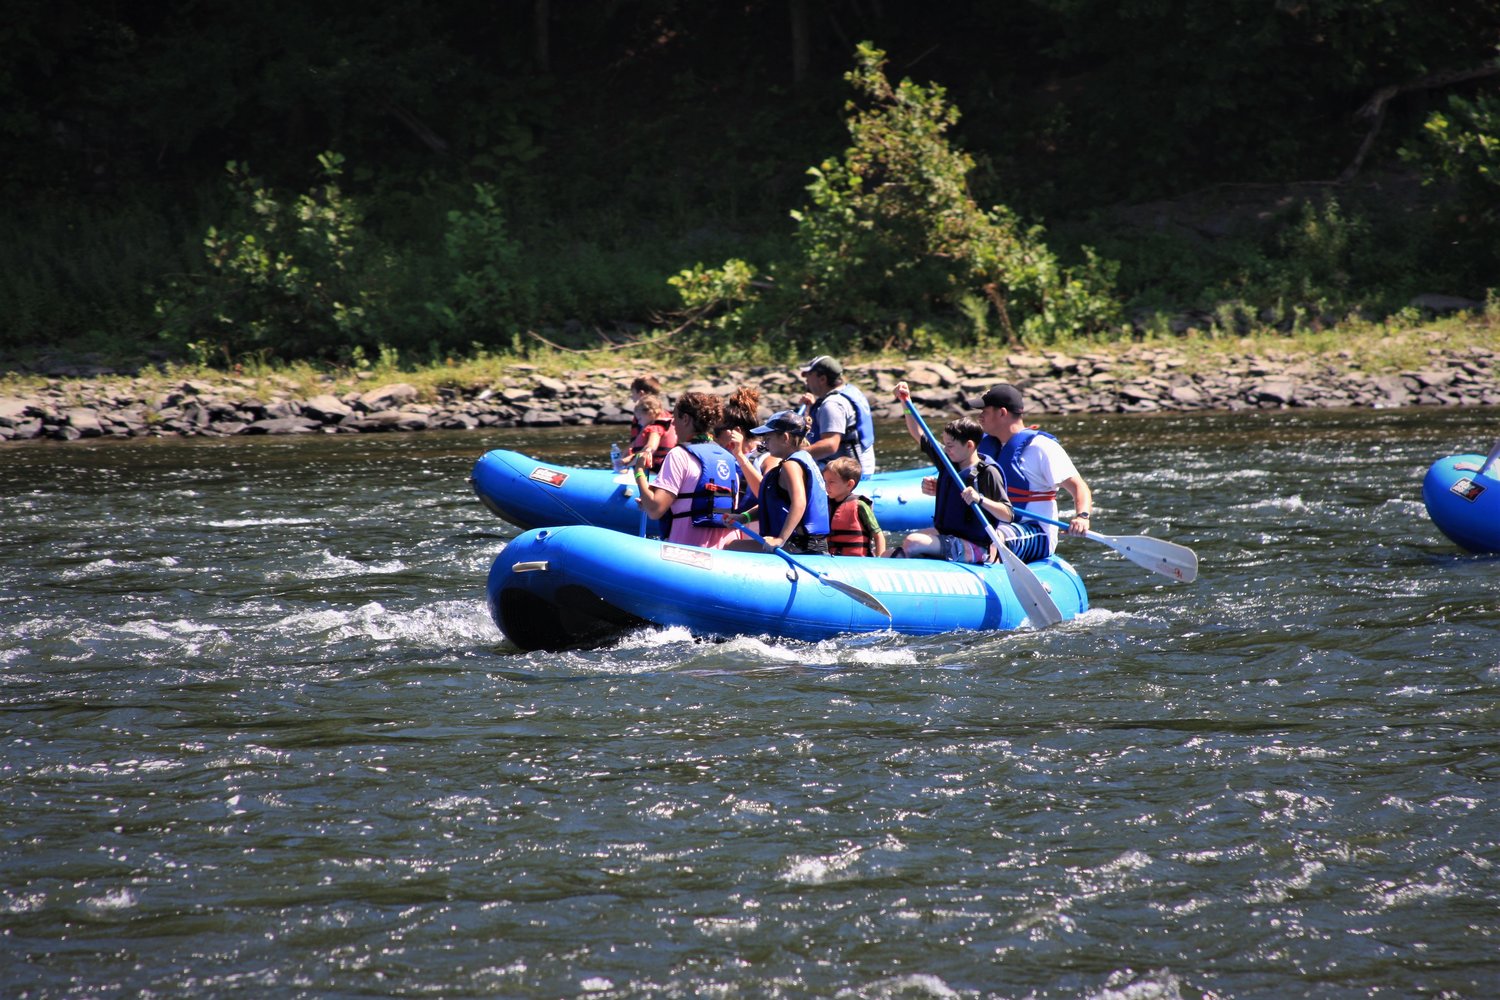 Boaters enjoying a rafting trip while wearing their life jackets.